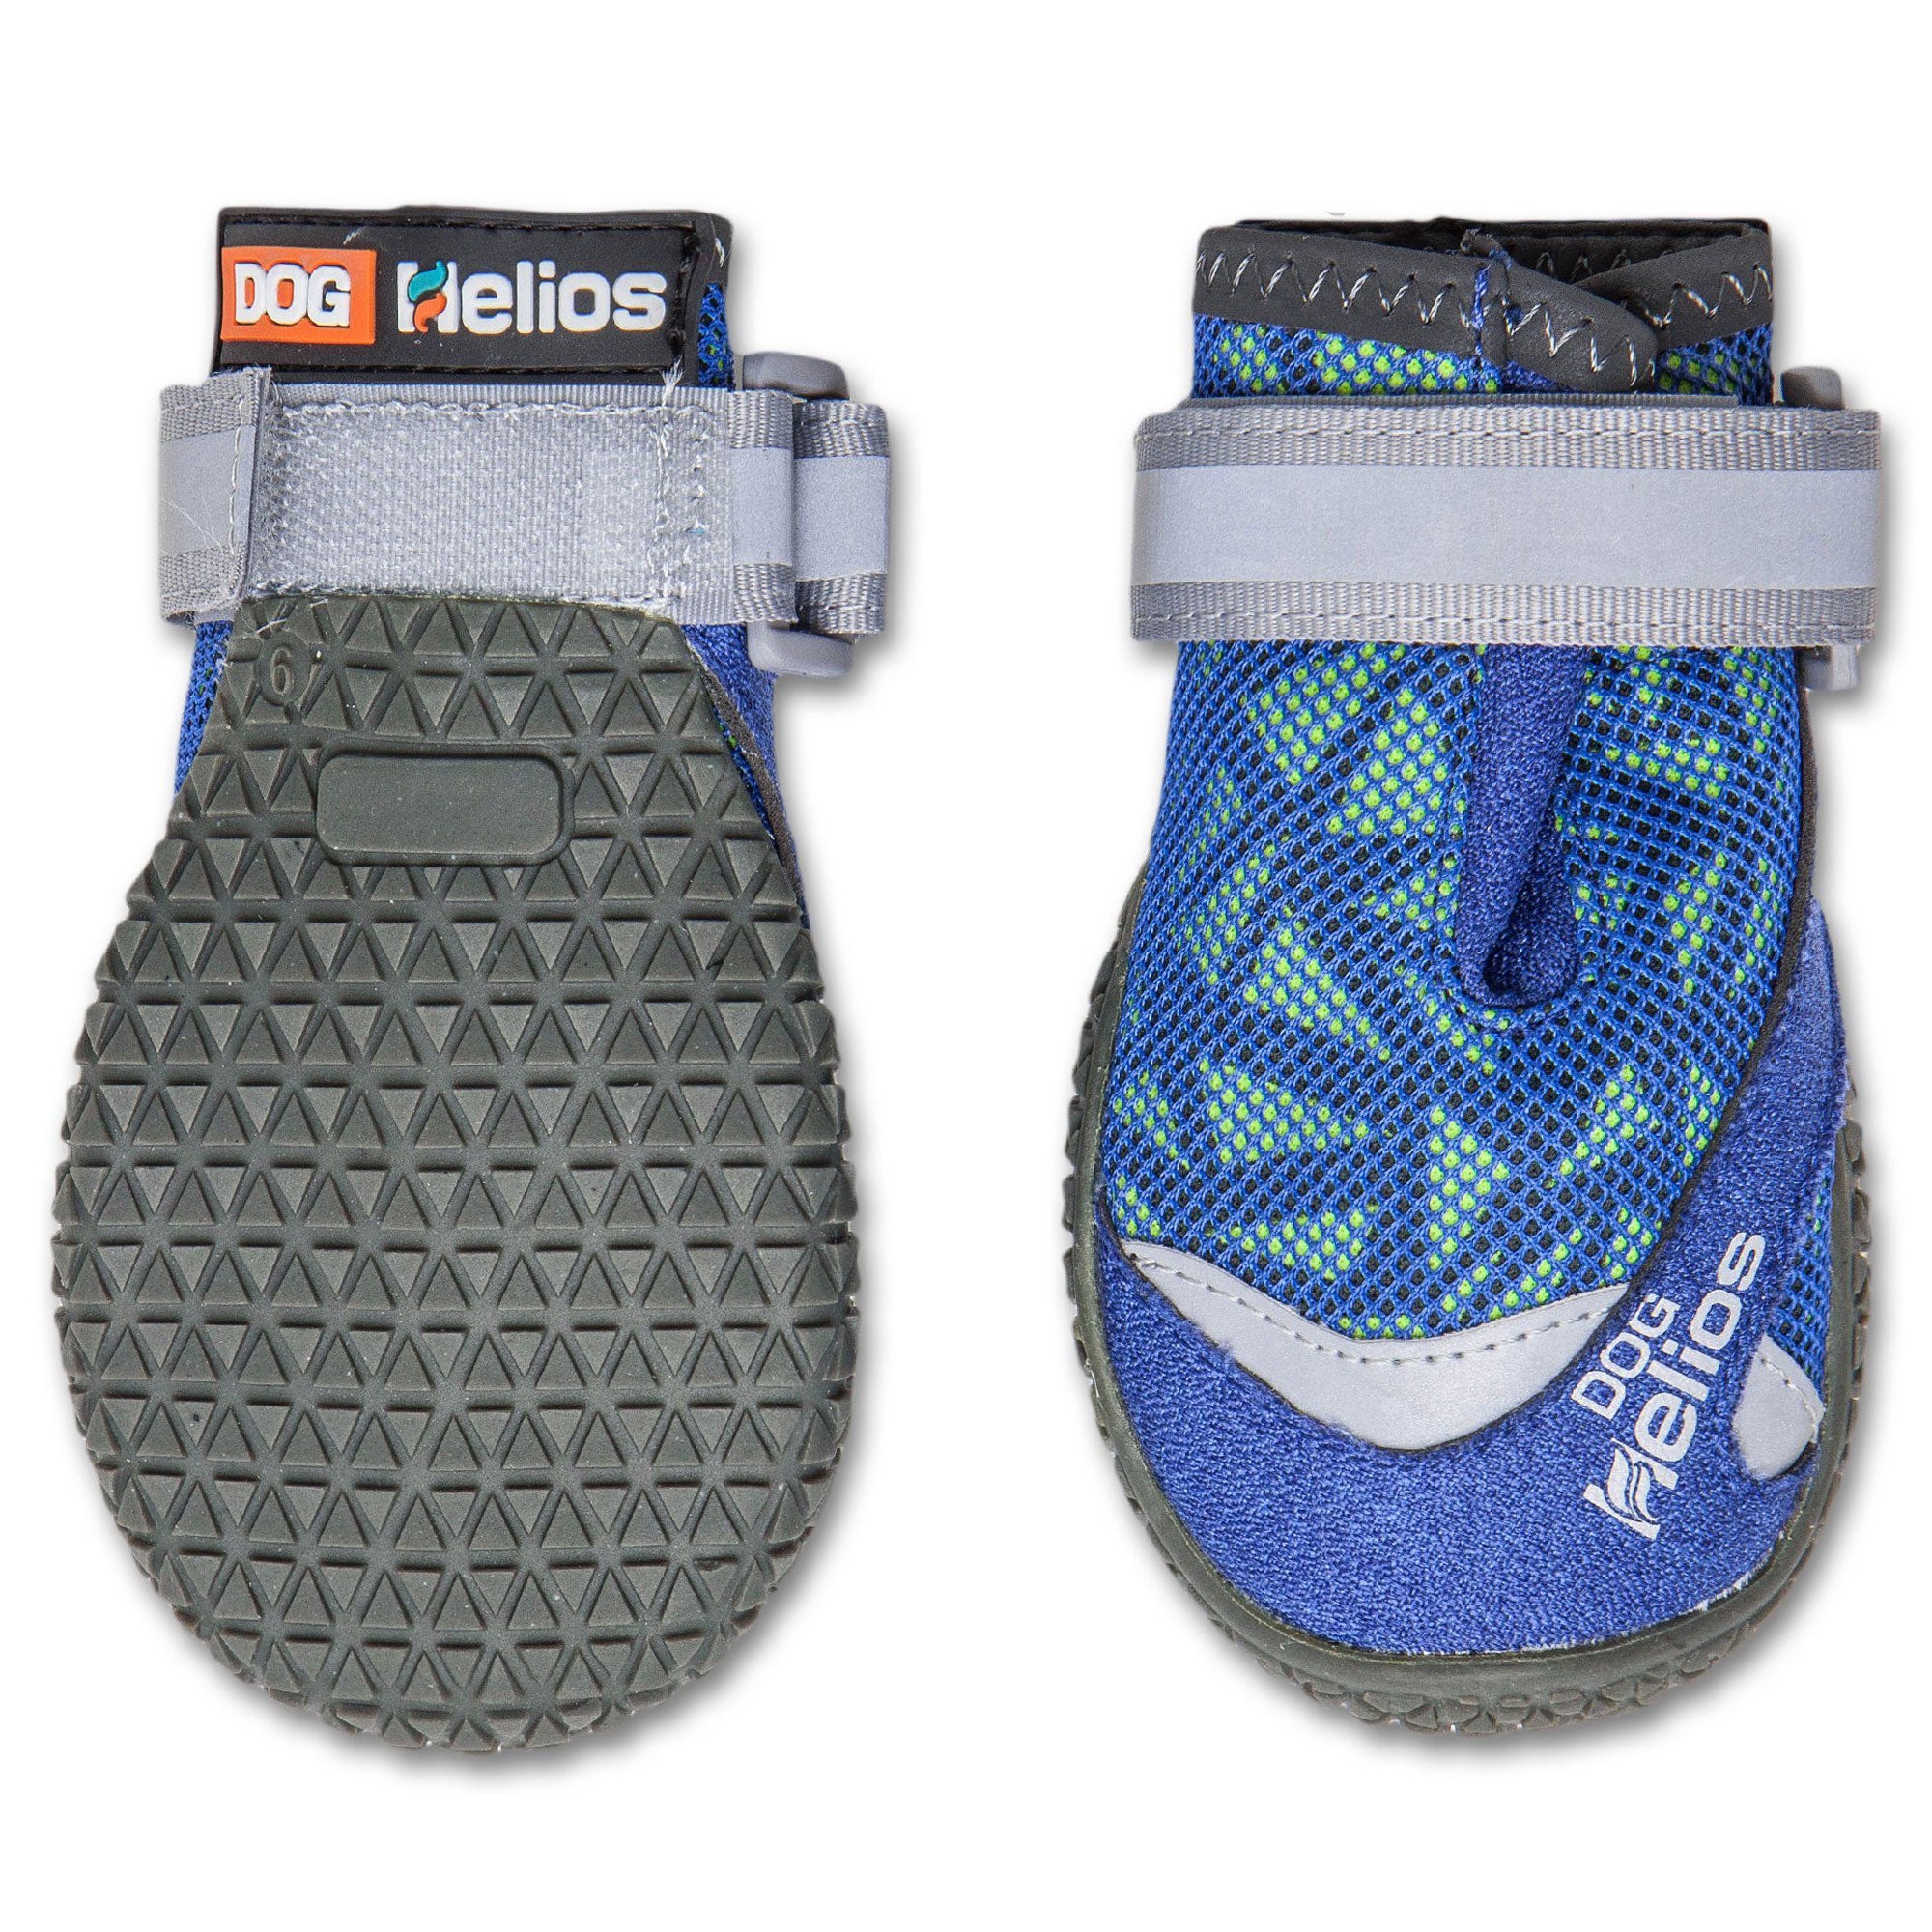 Dog Helios® Surface Performance Dog Shoes - Blue - Small